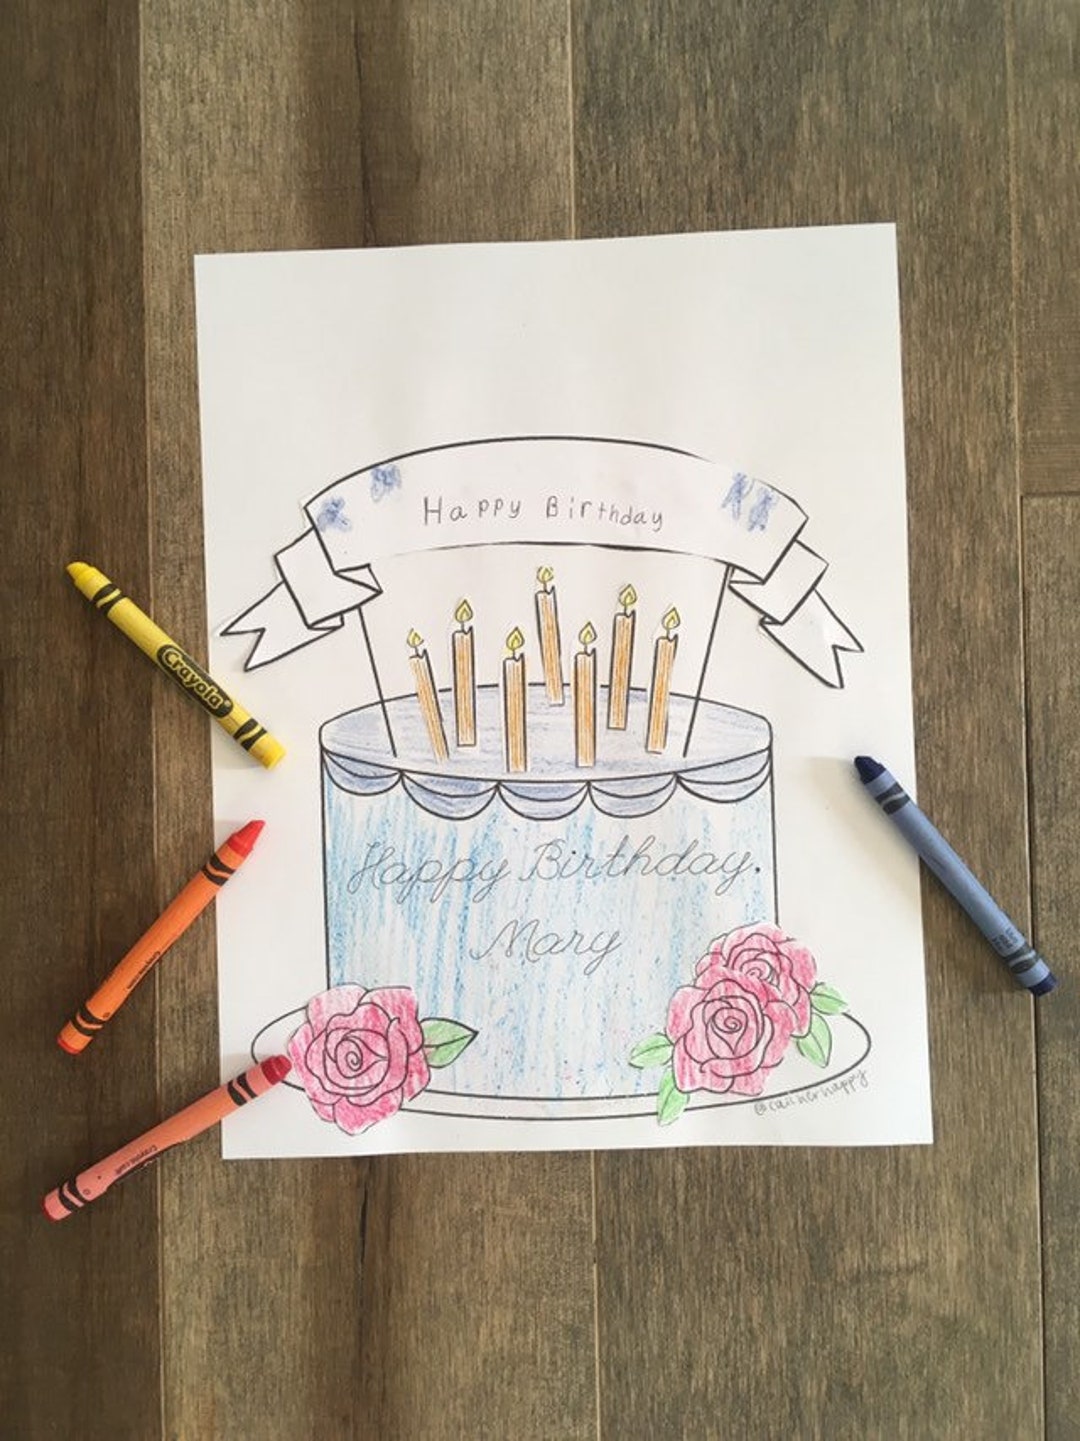 Nativity of mary birthday coloring page sheet liturgical year catholic resources for kids lazy liturgical feast day holiday prayer activity